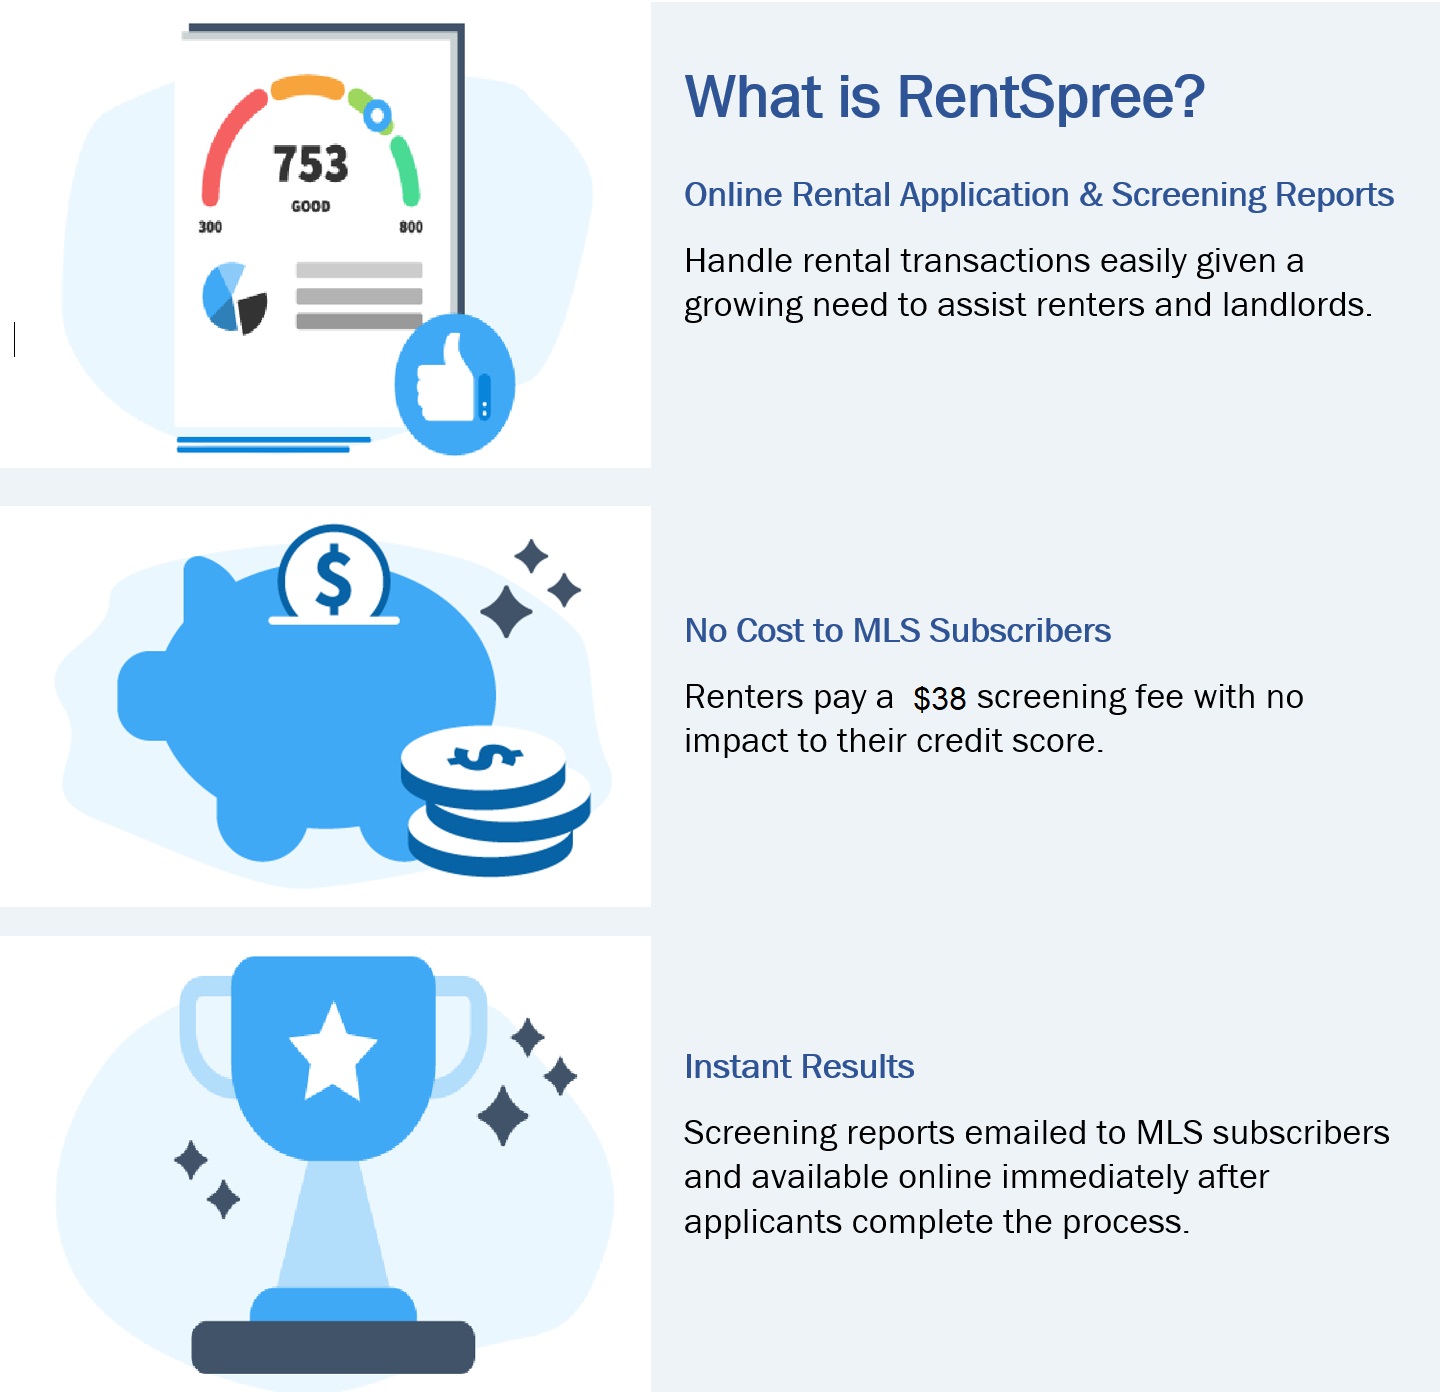 RentSpree Infographic. What is Rent Spree? Online Rental Application & Screening Reports Handle rental transactions easily given a growing need to assist renters and landlords. No Cost to MLS Subscribers Renters pay a $38 screening fee with no impact to their credit score. Instant Results. Screening reports emailed to MLS subscribers and available online immediately after applicants complete the process.